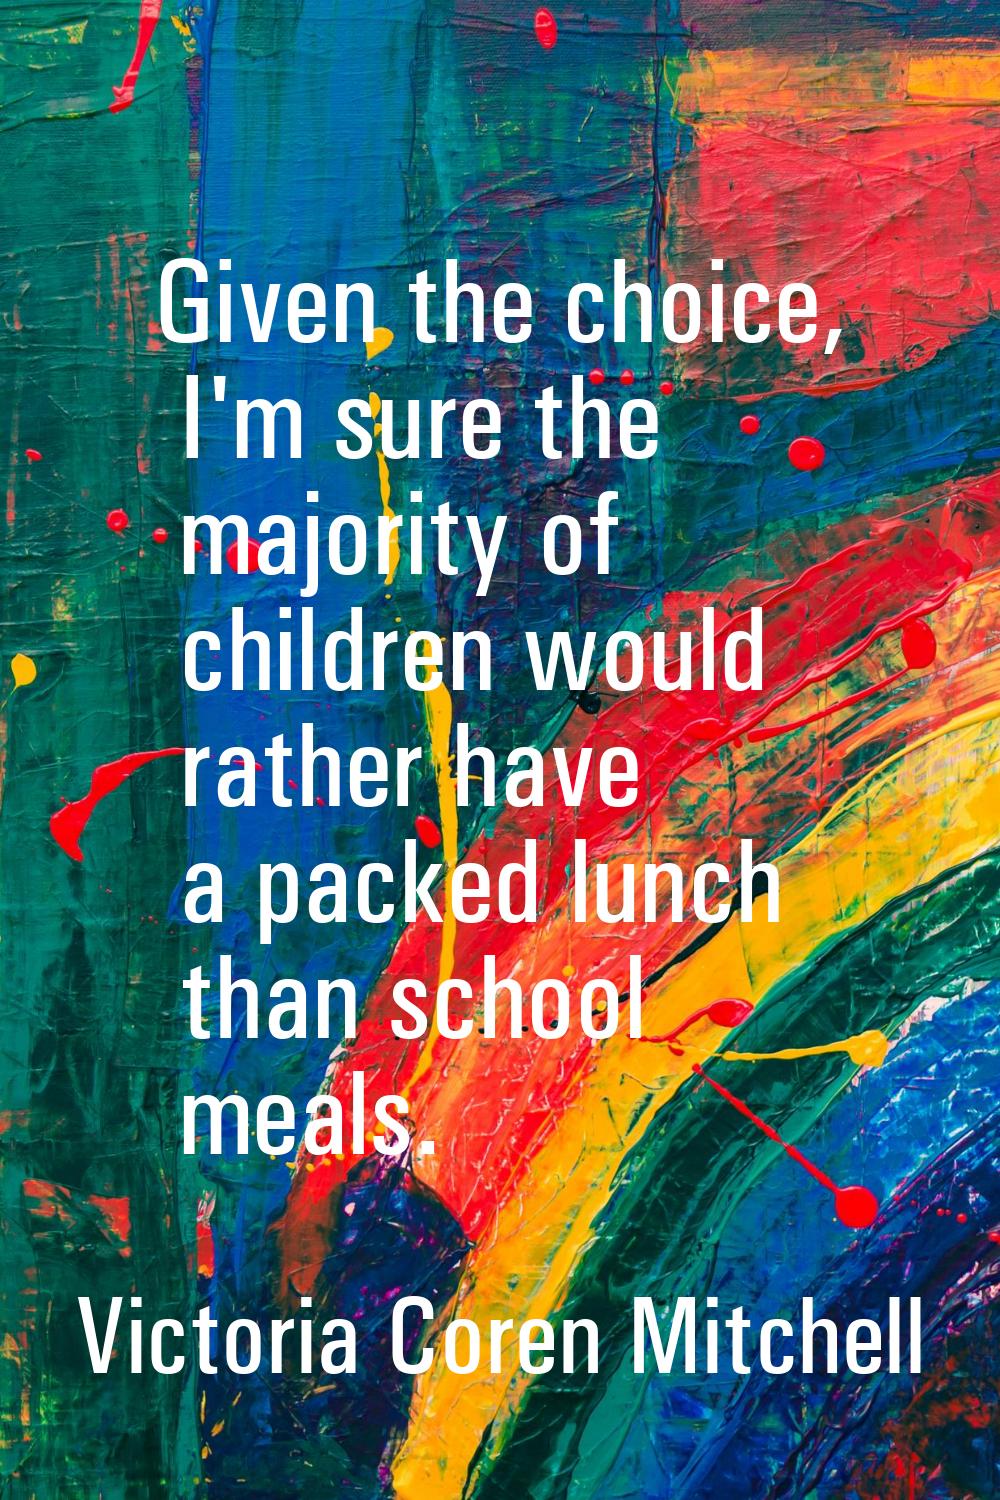 Given the choice, I'm sure the majority of children would rather have a packed lunch than school me